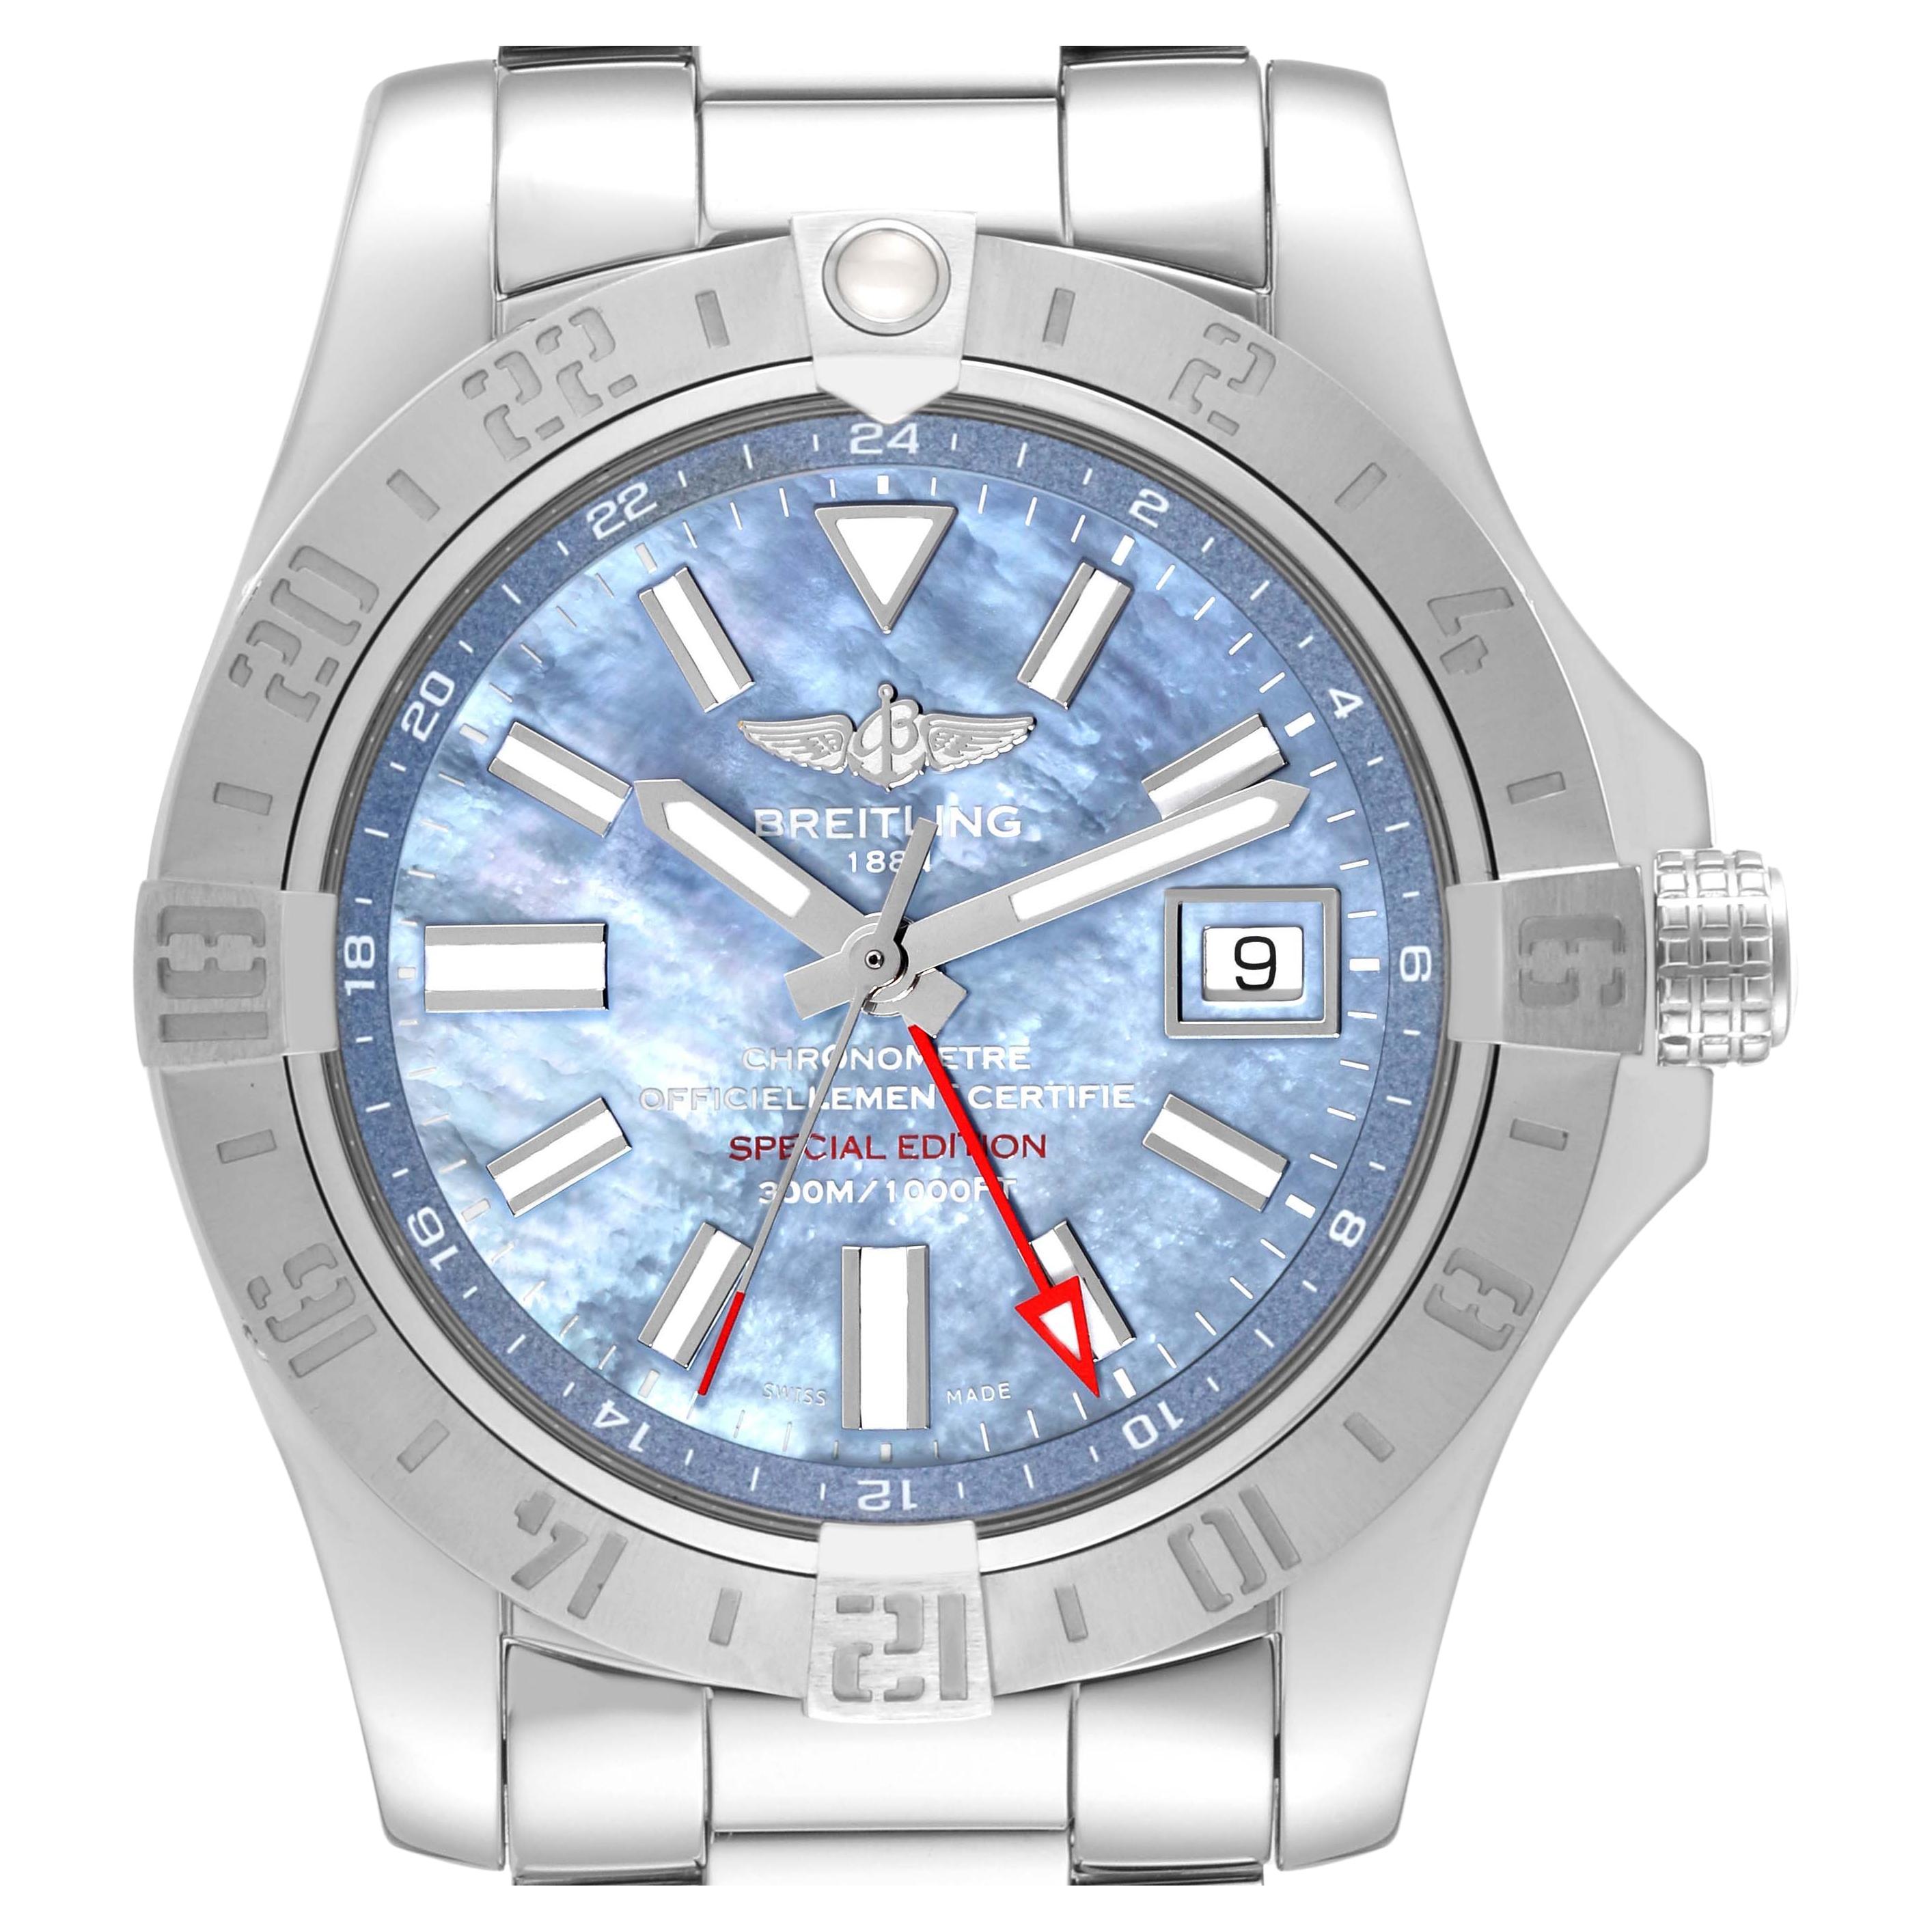 Breitling Avenger II GMT Blue Mother of Pearl Dial Steel Watch A32390 Box Card For Sale